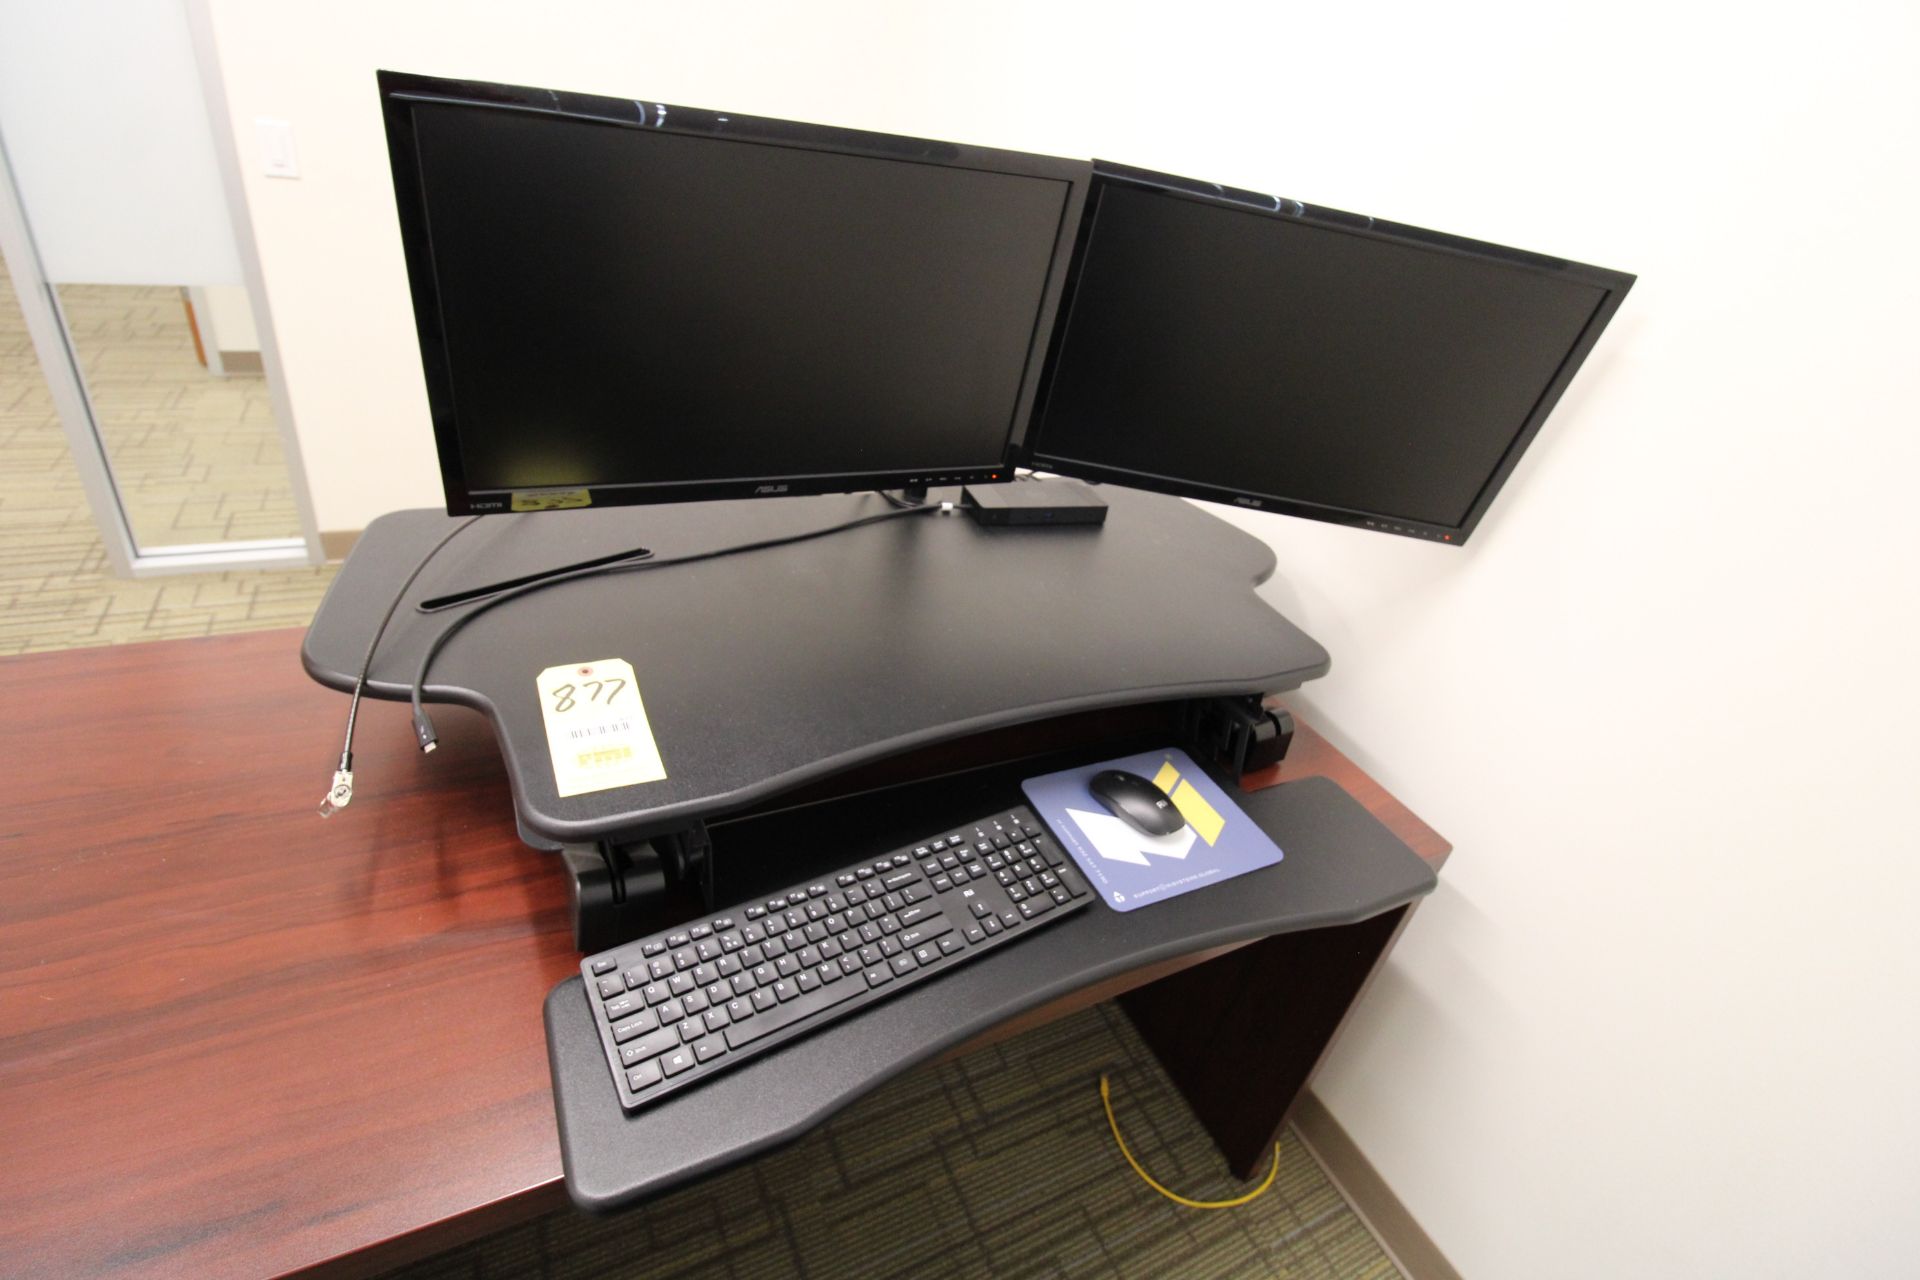 SIT-STAND DESK CONVERTER, MOUNT IT,  w/ dual monitor mount and monitors